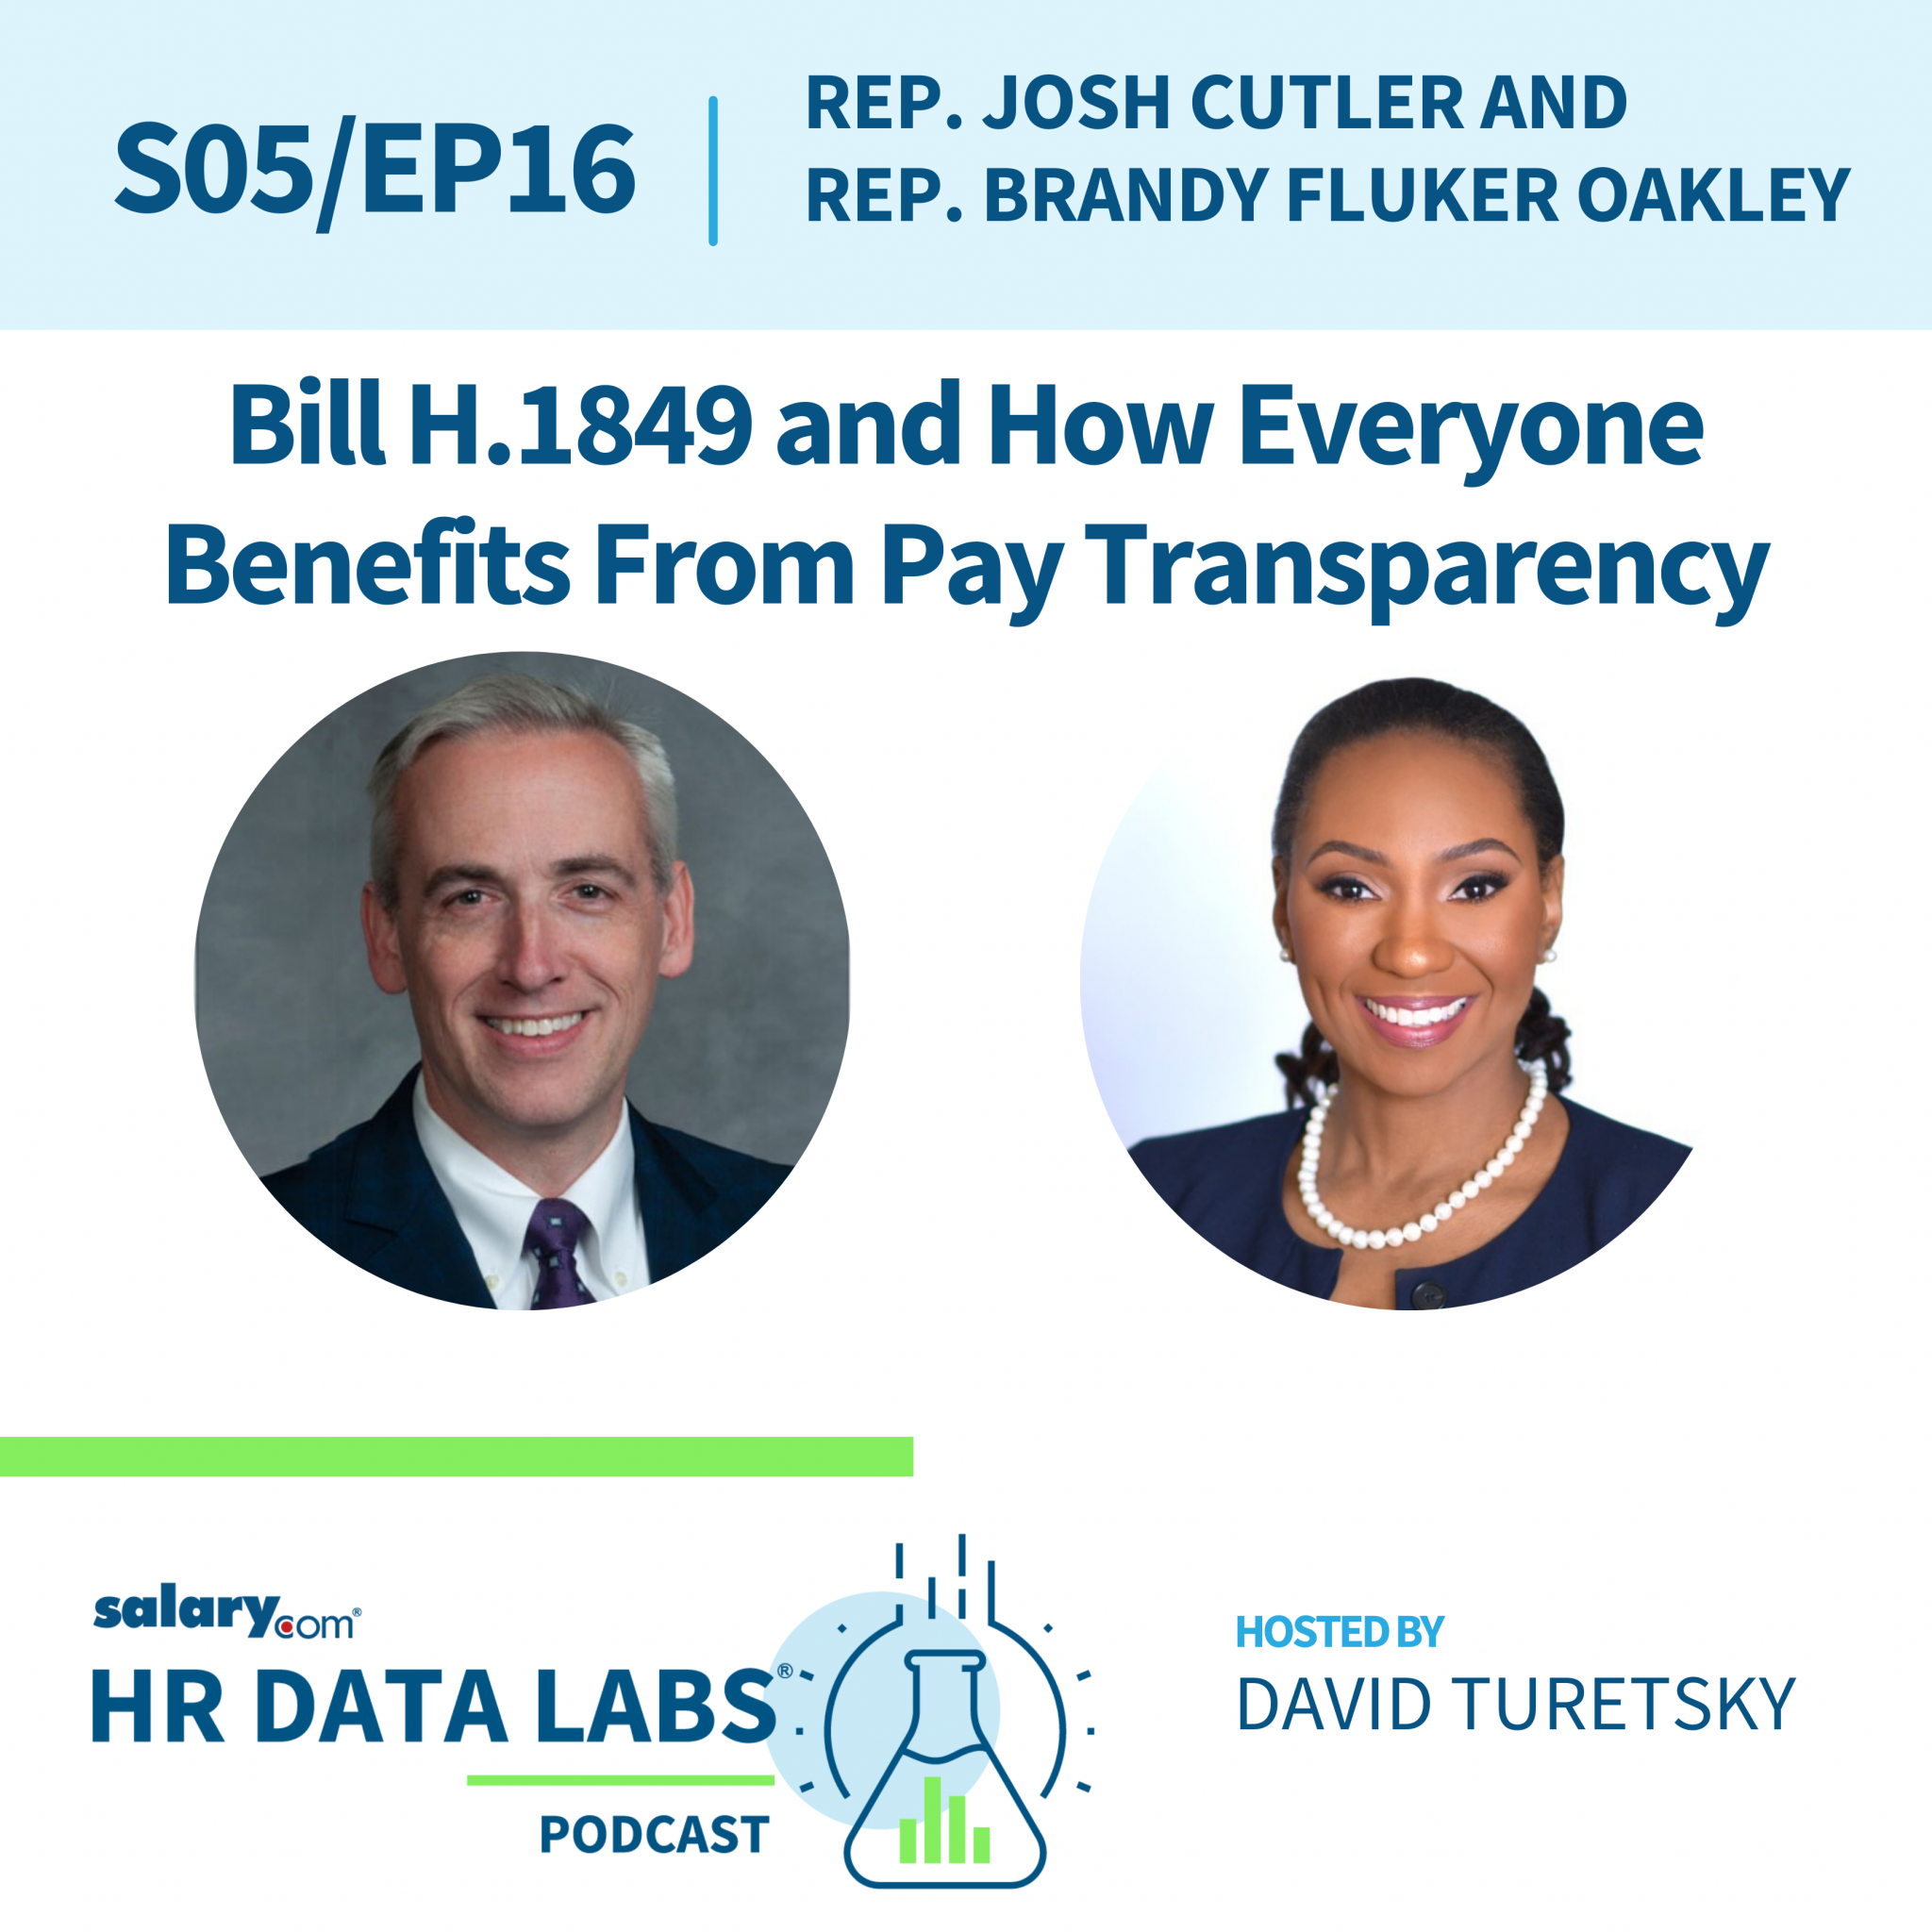 Rep. Josh Cutler and Rep. Brandy Fluker Oakley – Bill H.1849 and How Everyone Benefits From Pay Transparency